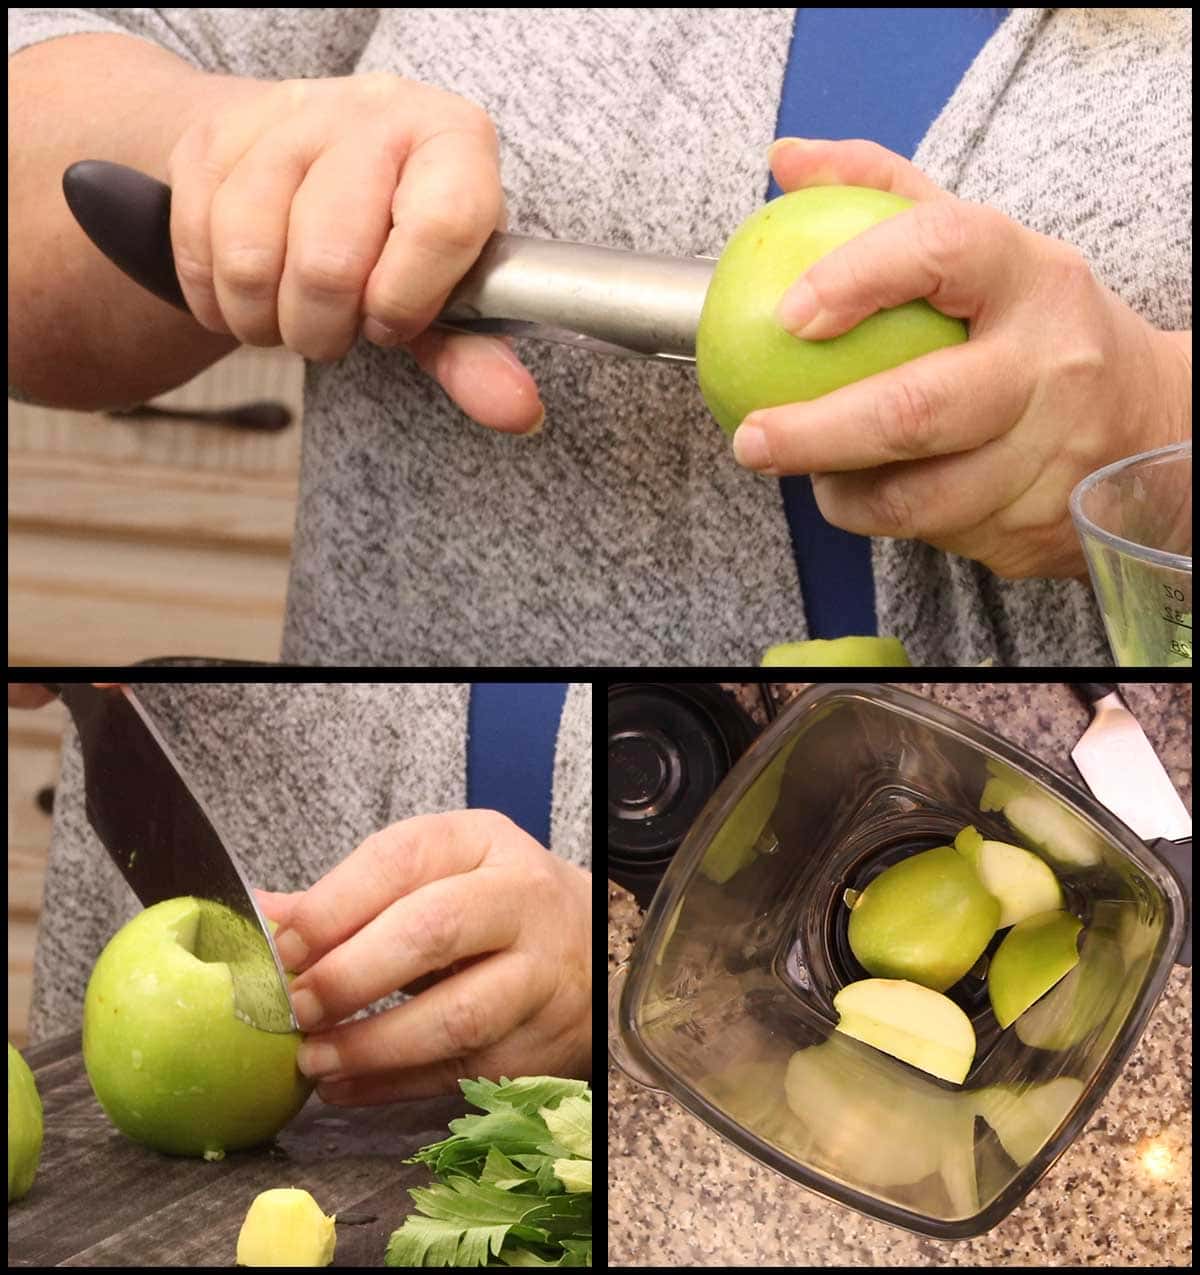 coring and quartering the apple for green juice